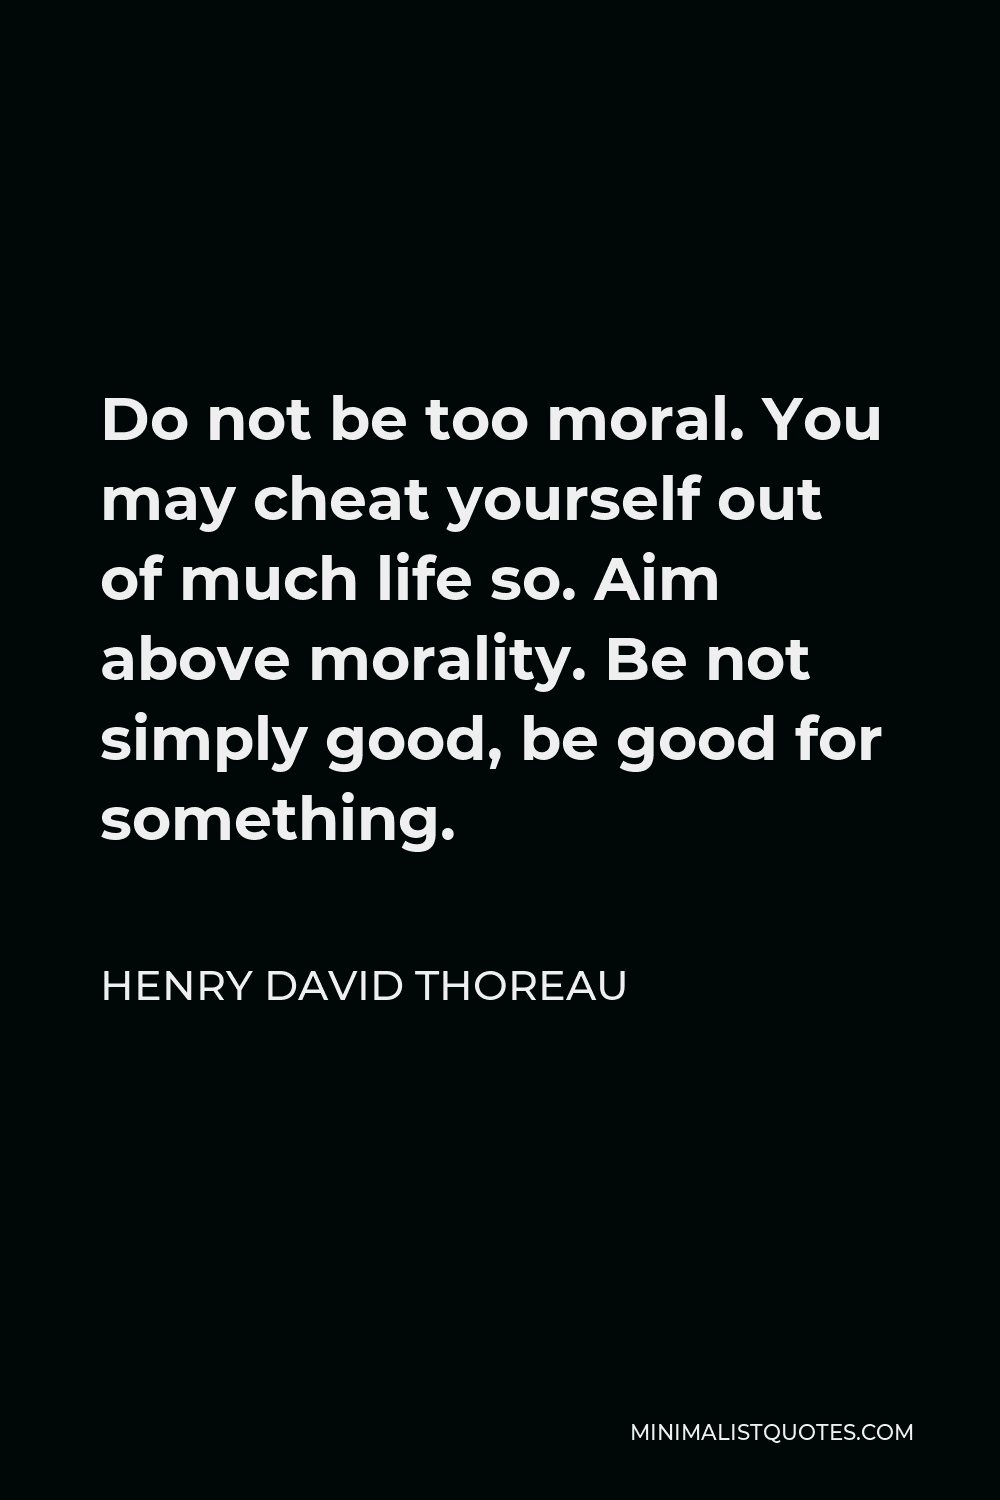 Henry David Thoreau Quote - Do not be too moral. You may cheat yourself out of much life so. Aim above morality. Be not simply good, be good for something.